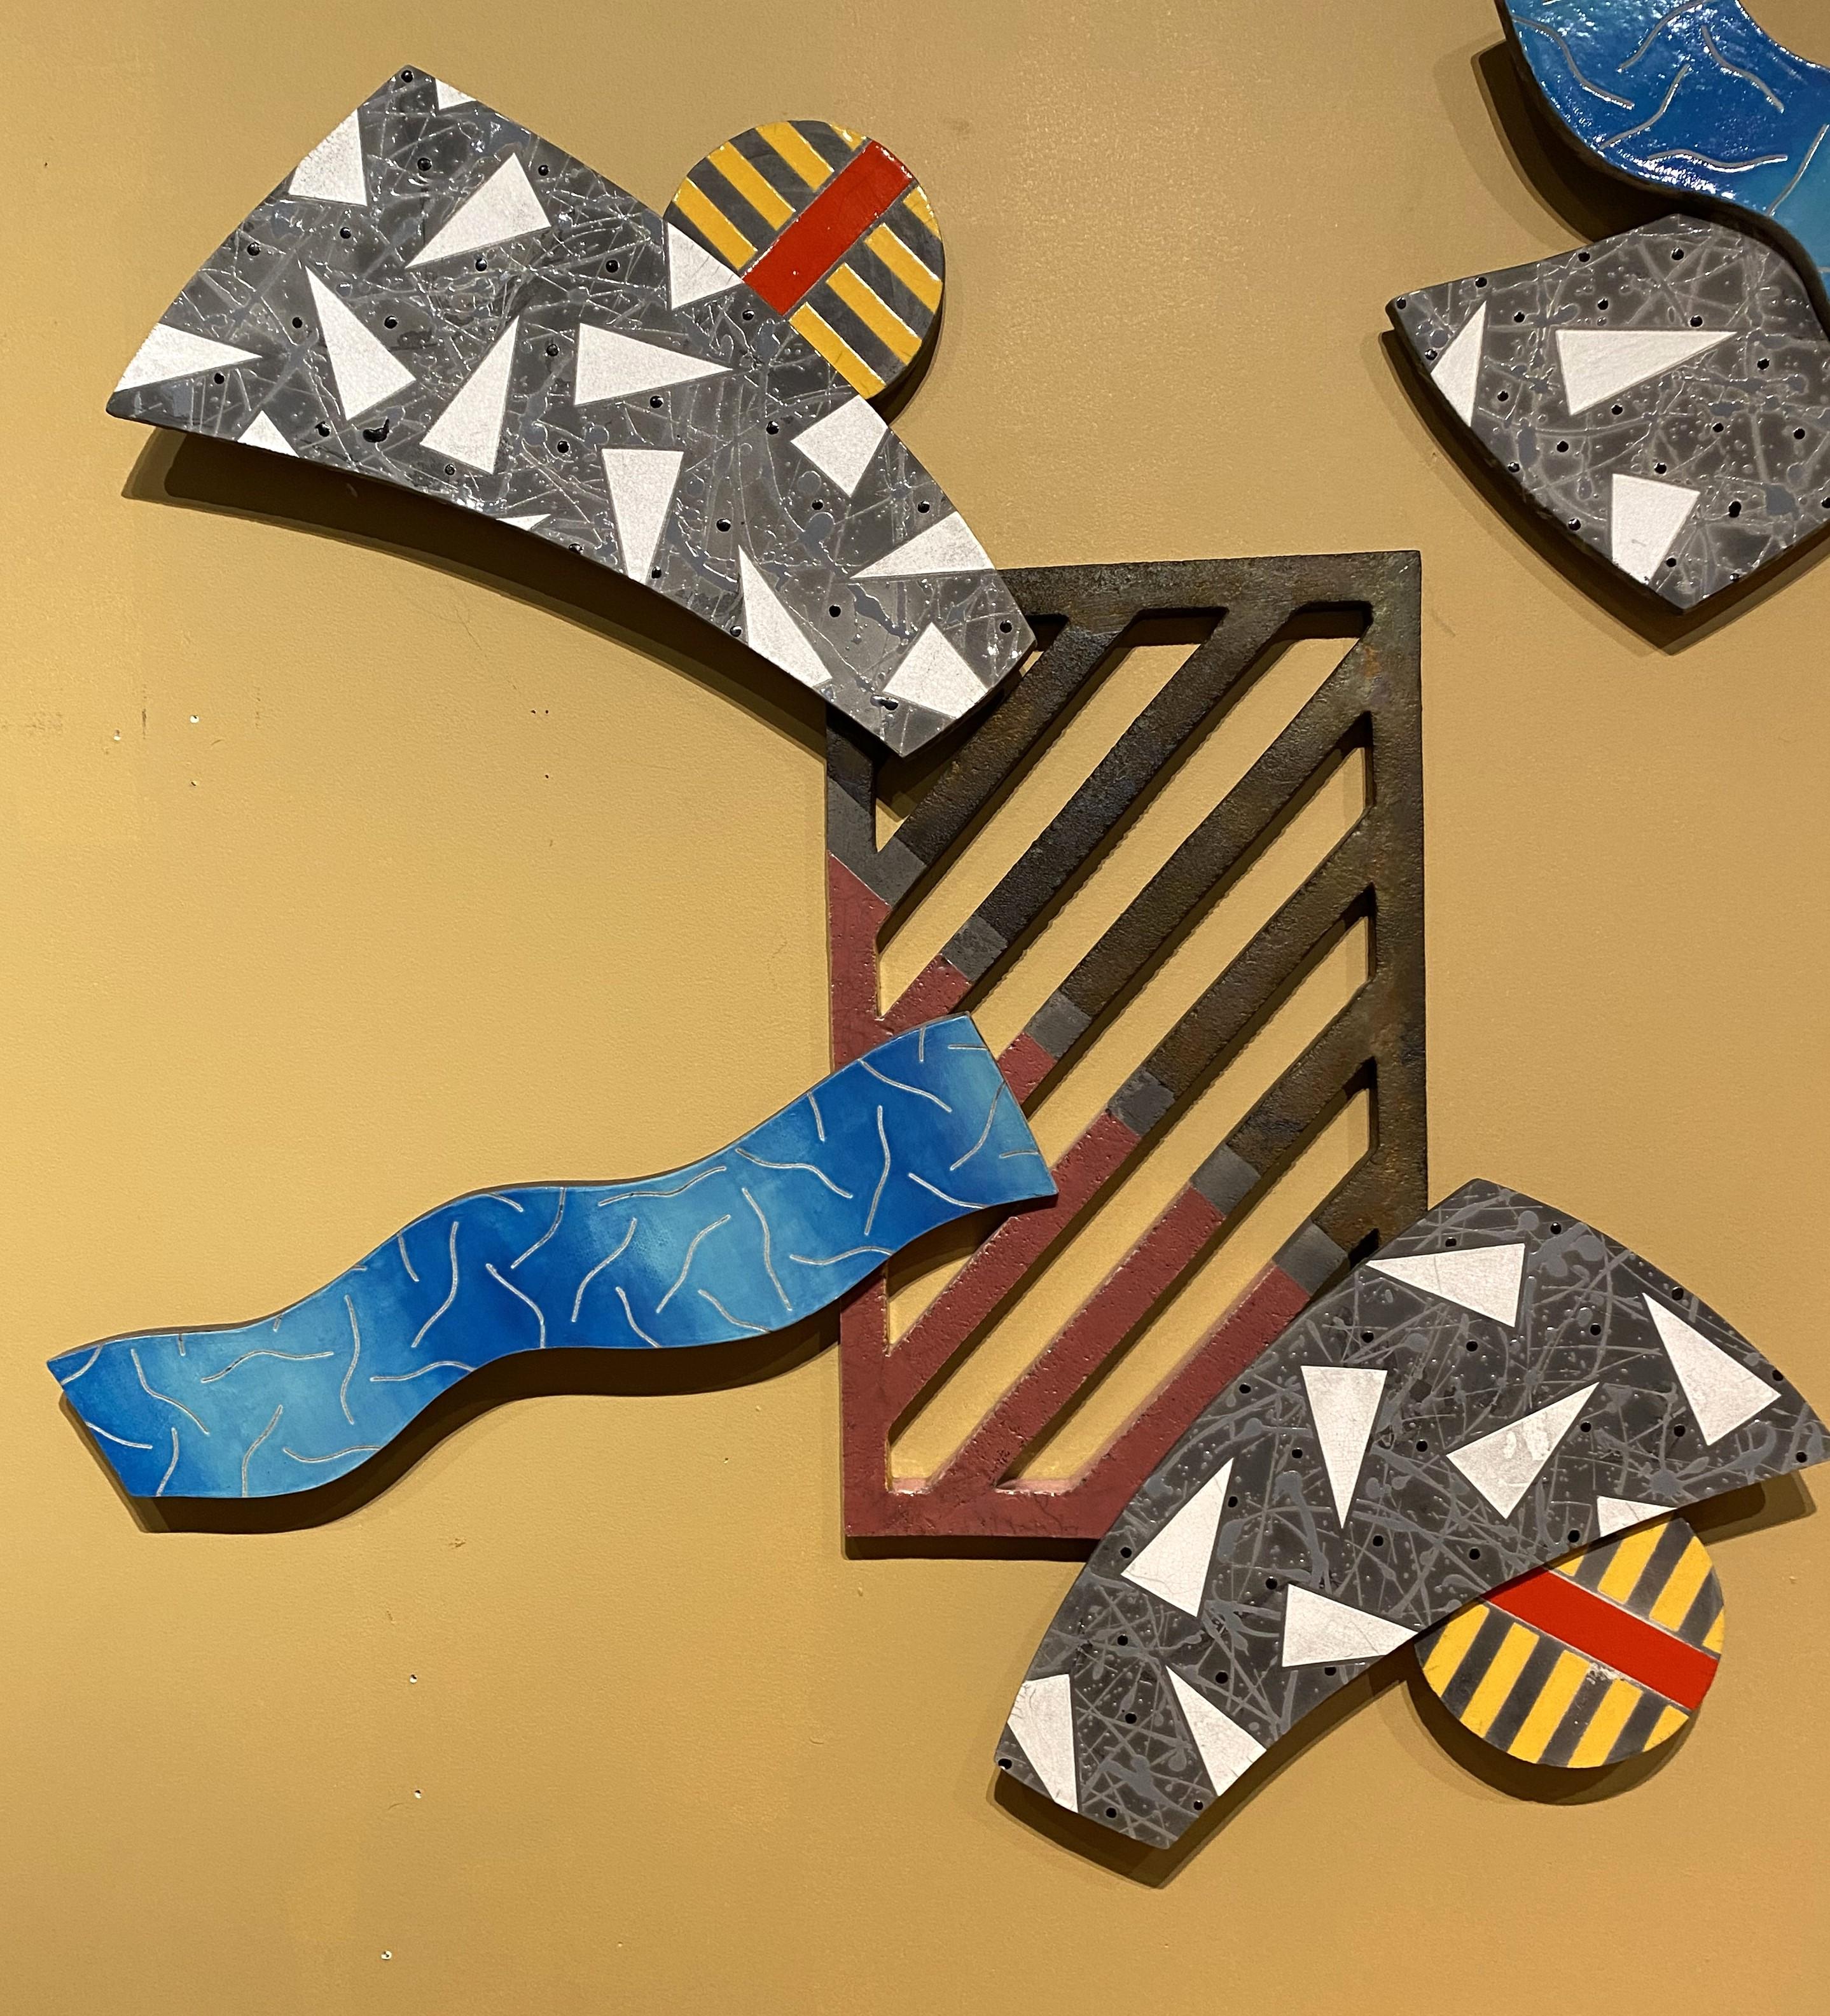 A colorful modernist abstract pottery polychrome wall sculpture, each piece with varying textures, colors, and shapes by American artist and professor Bruce Lenore (b. 1955). Lenore is not only an artist, but was an art teacher at Smithfield High